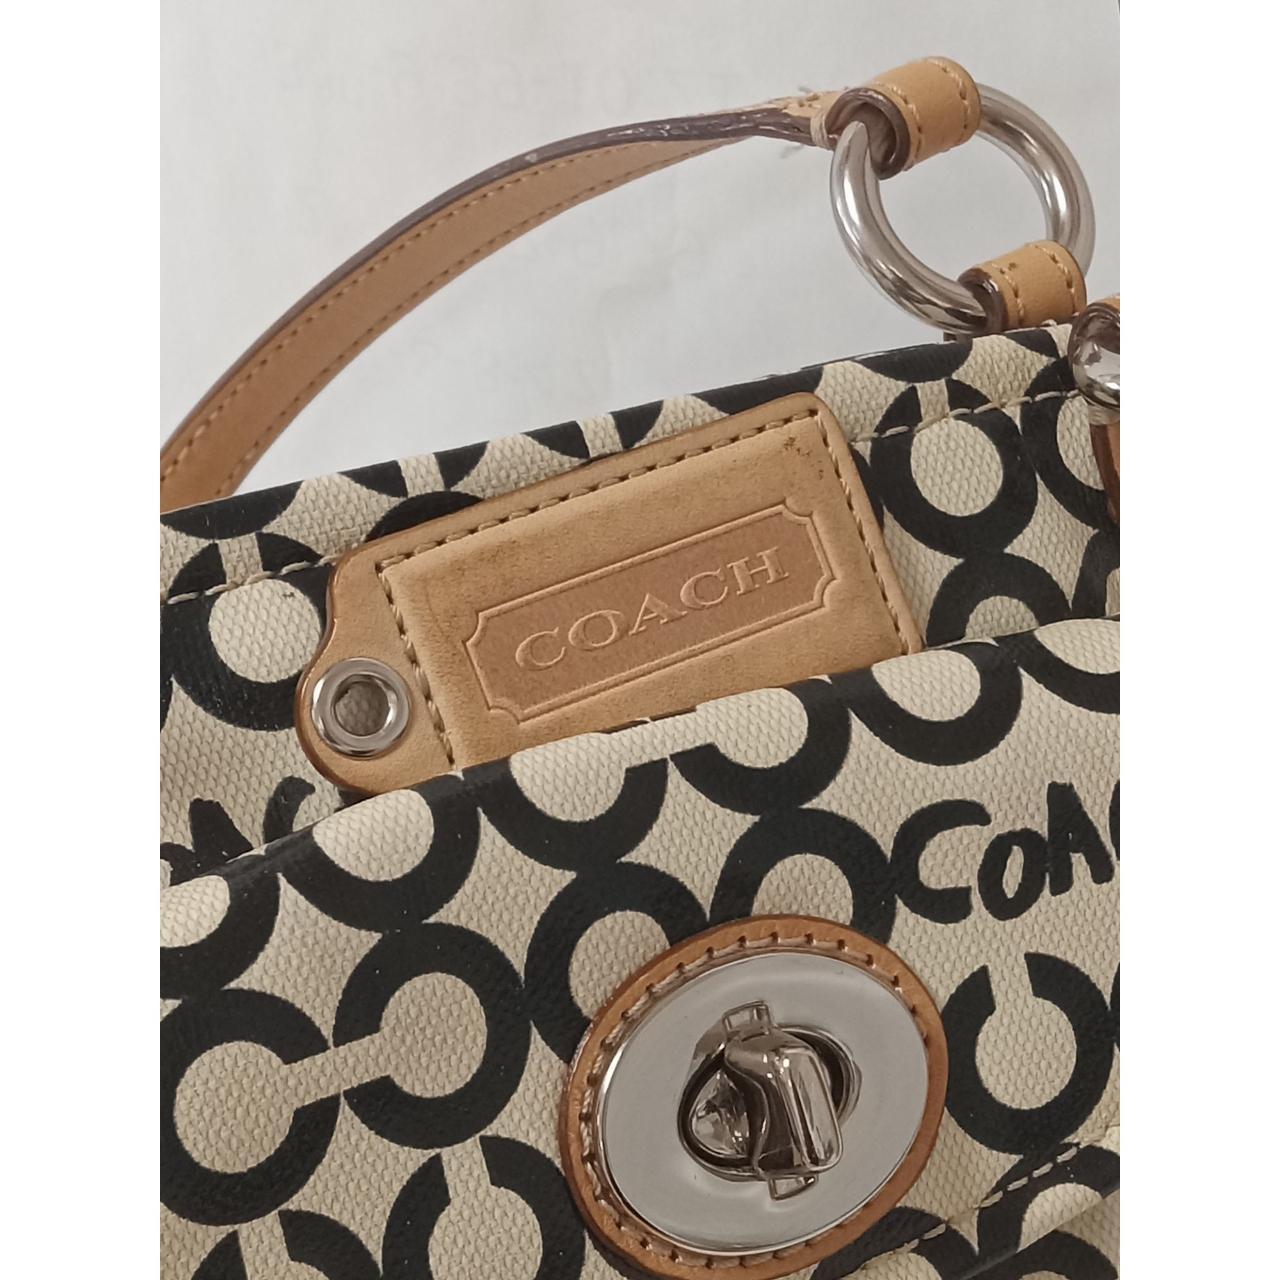 Coach logoed coated canvas bag. 7 inch long 3 inches - Depop